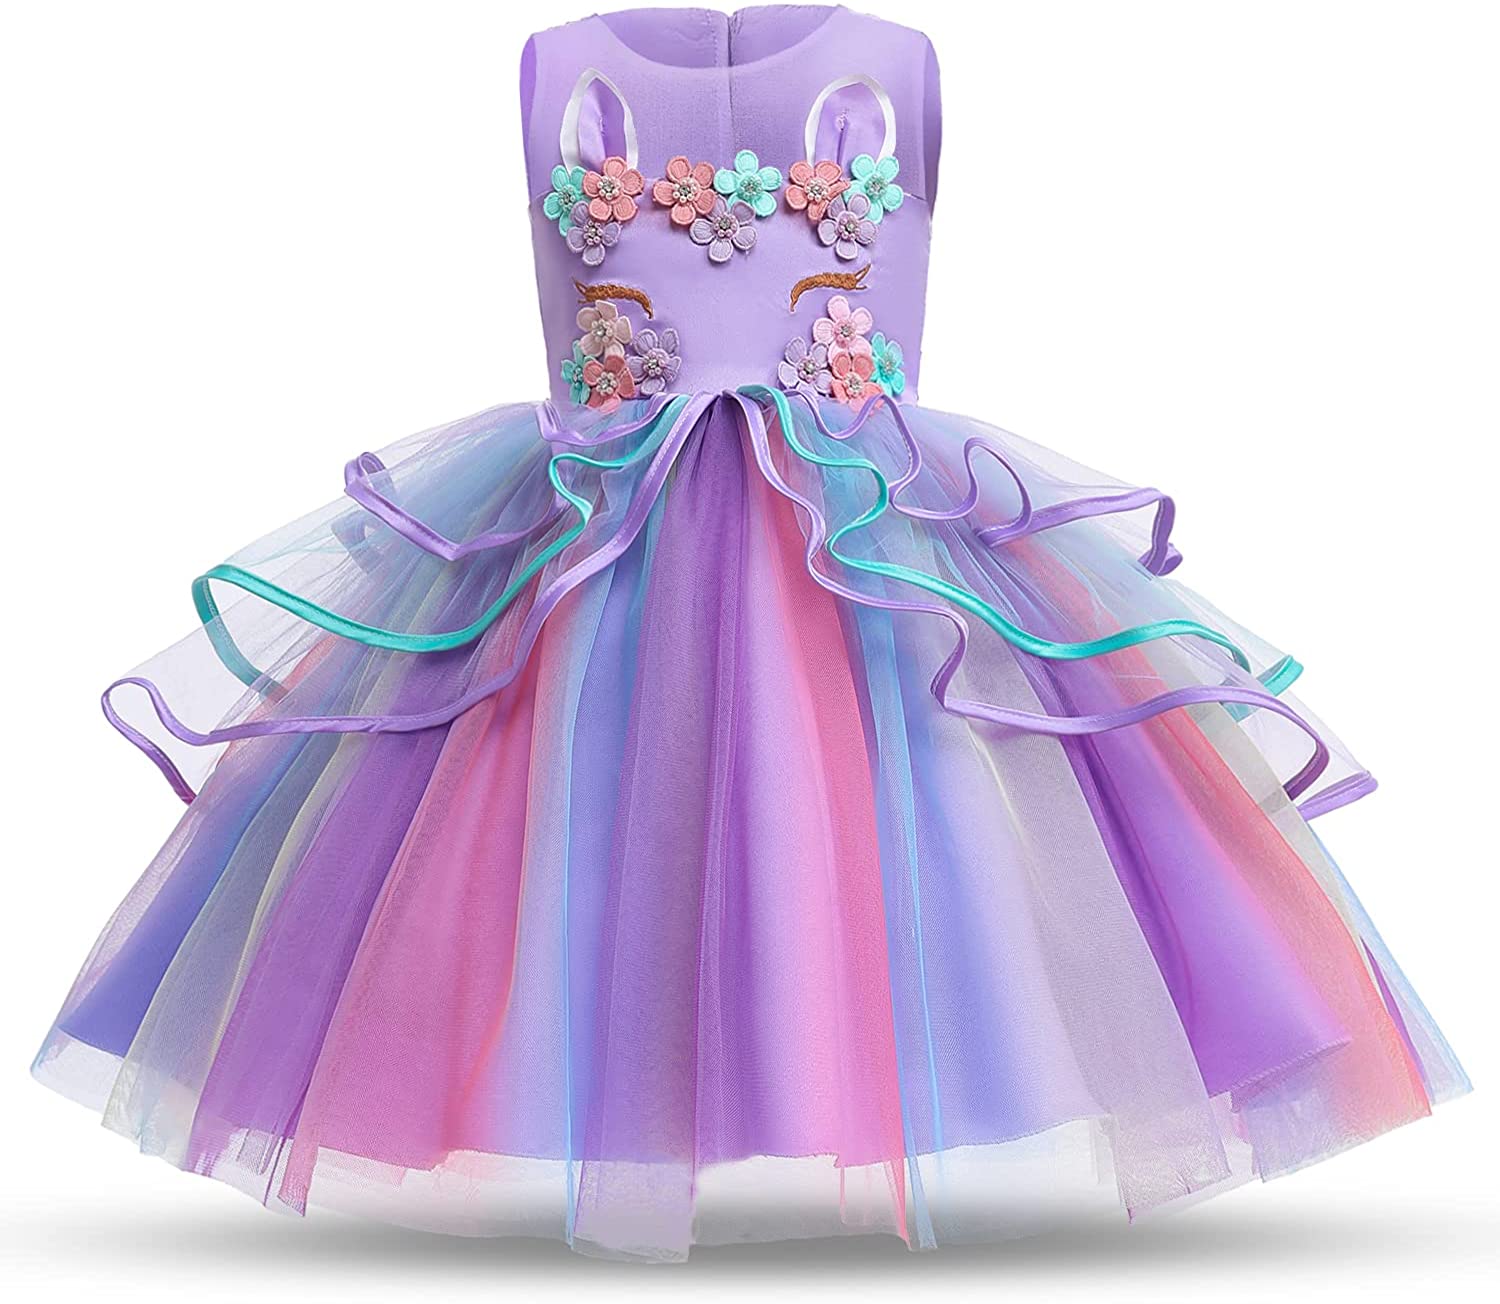 NNJXD Girl Dress Kids Ruffles Lace Party Wedding Gown Rainbow Tulle